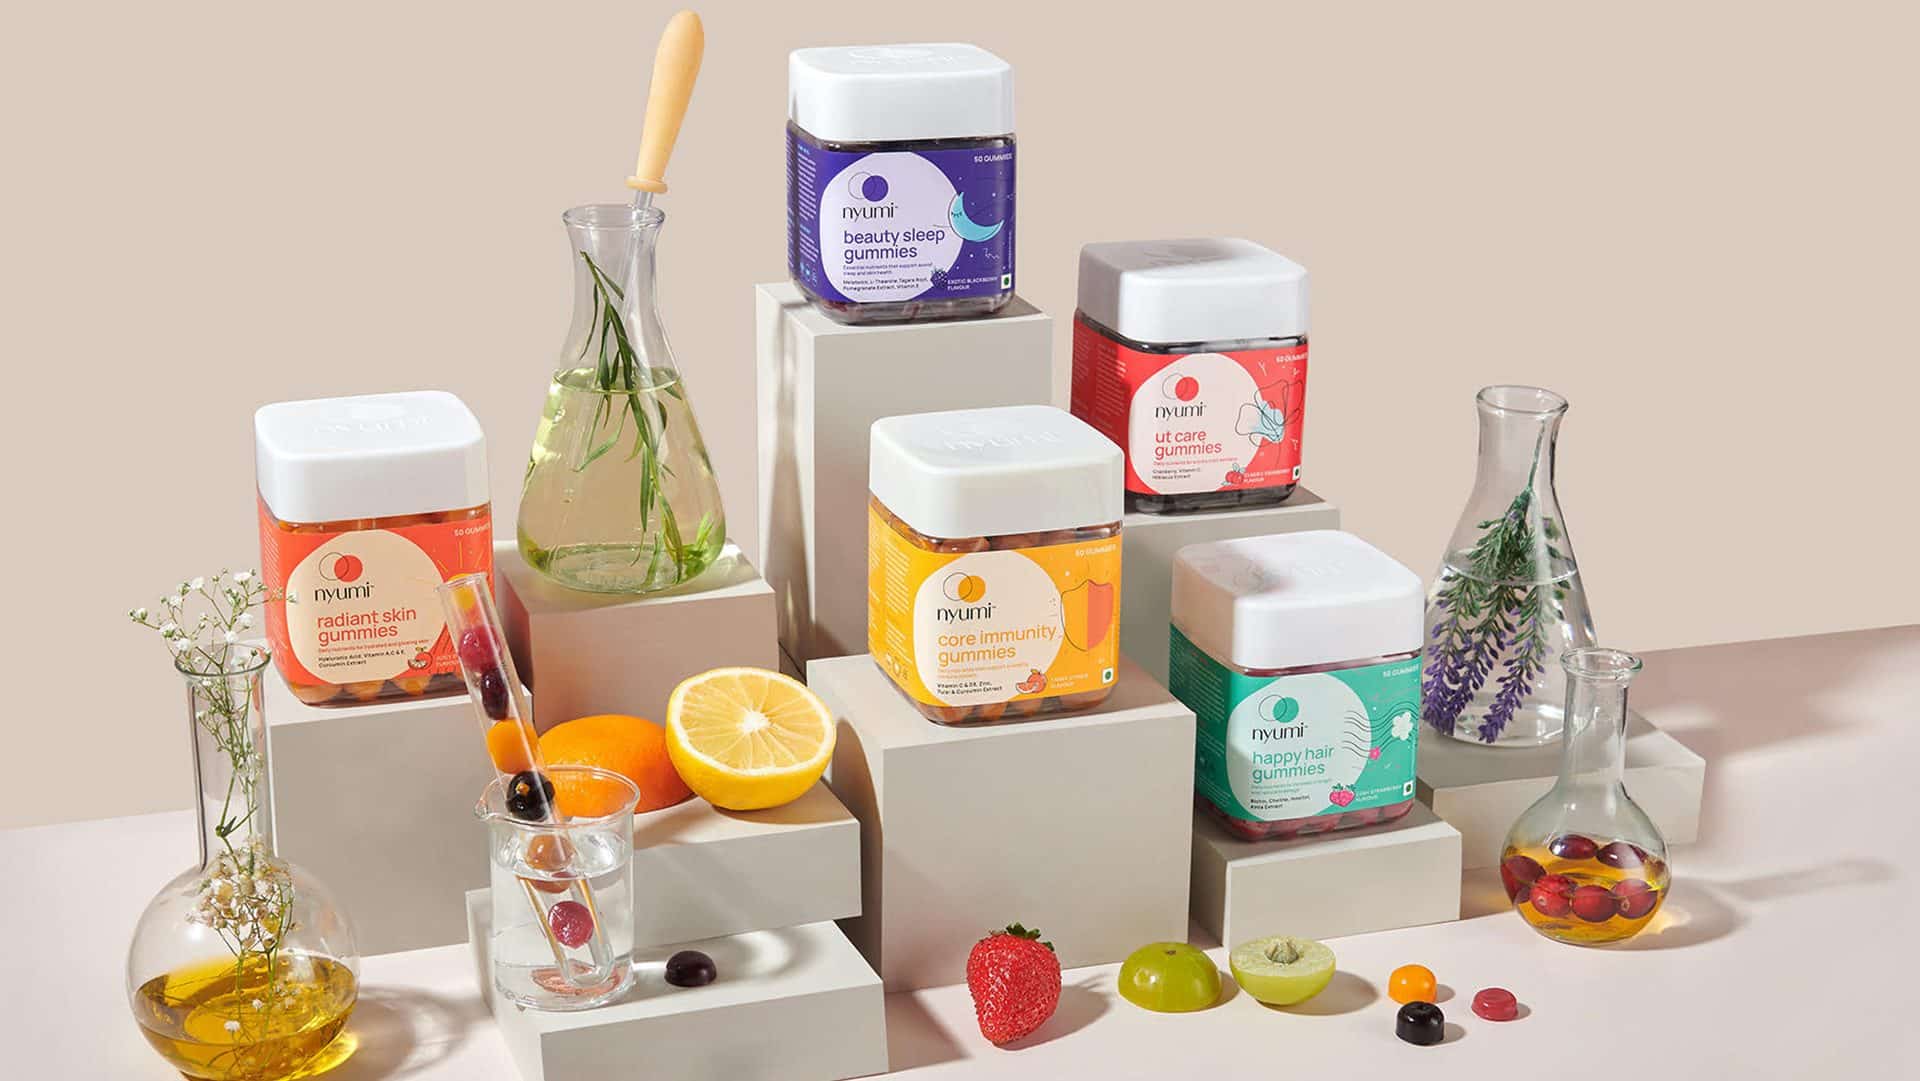 Nyumi launches five products to address daily vitamin needs of urban Indian woman